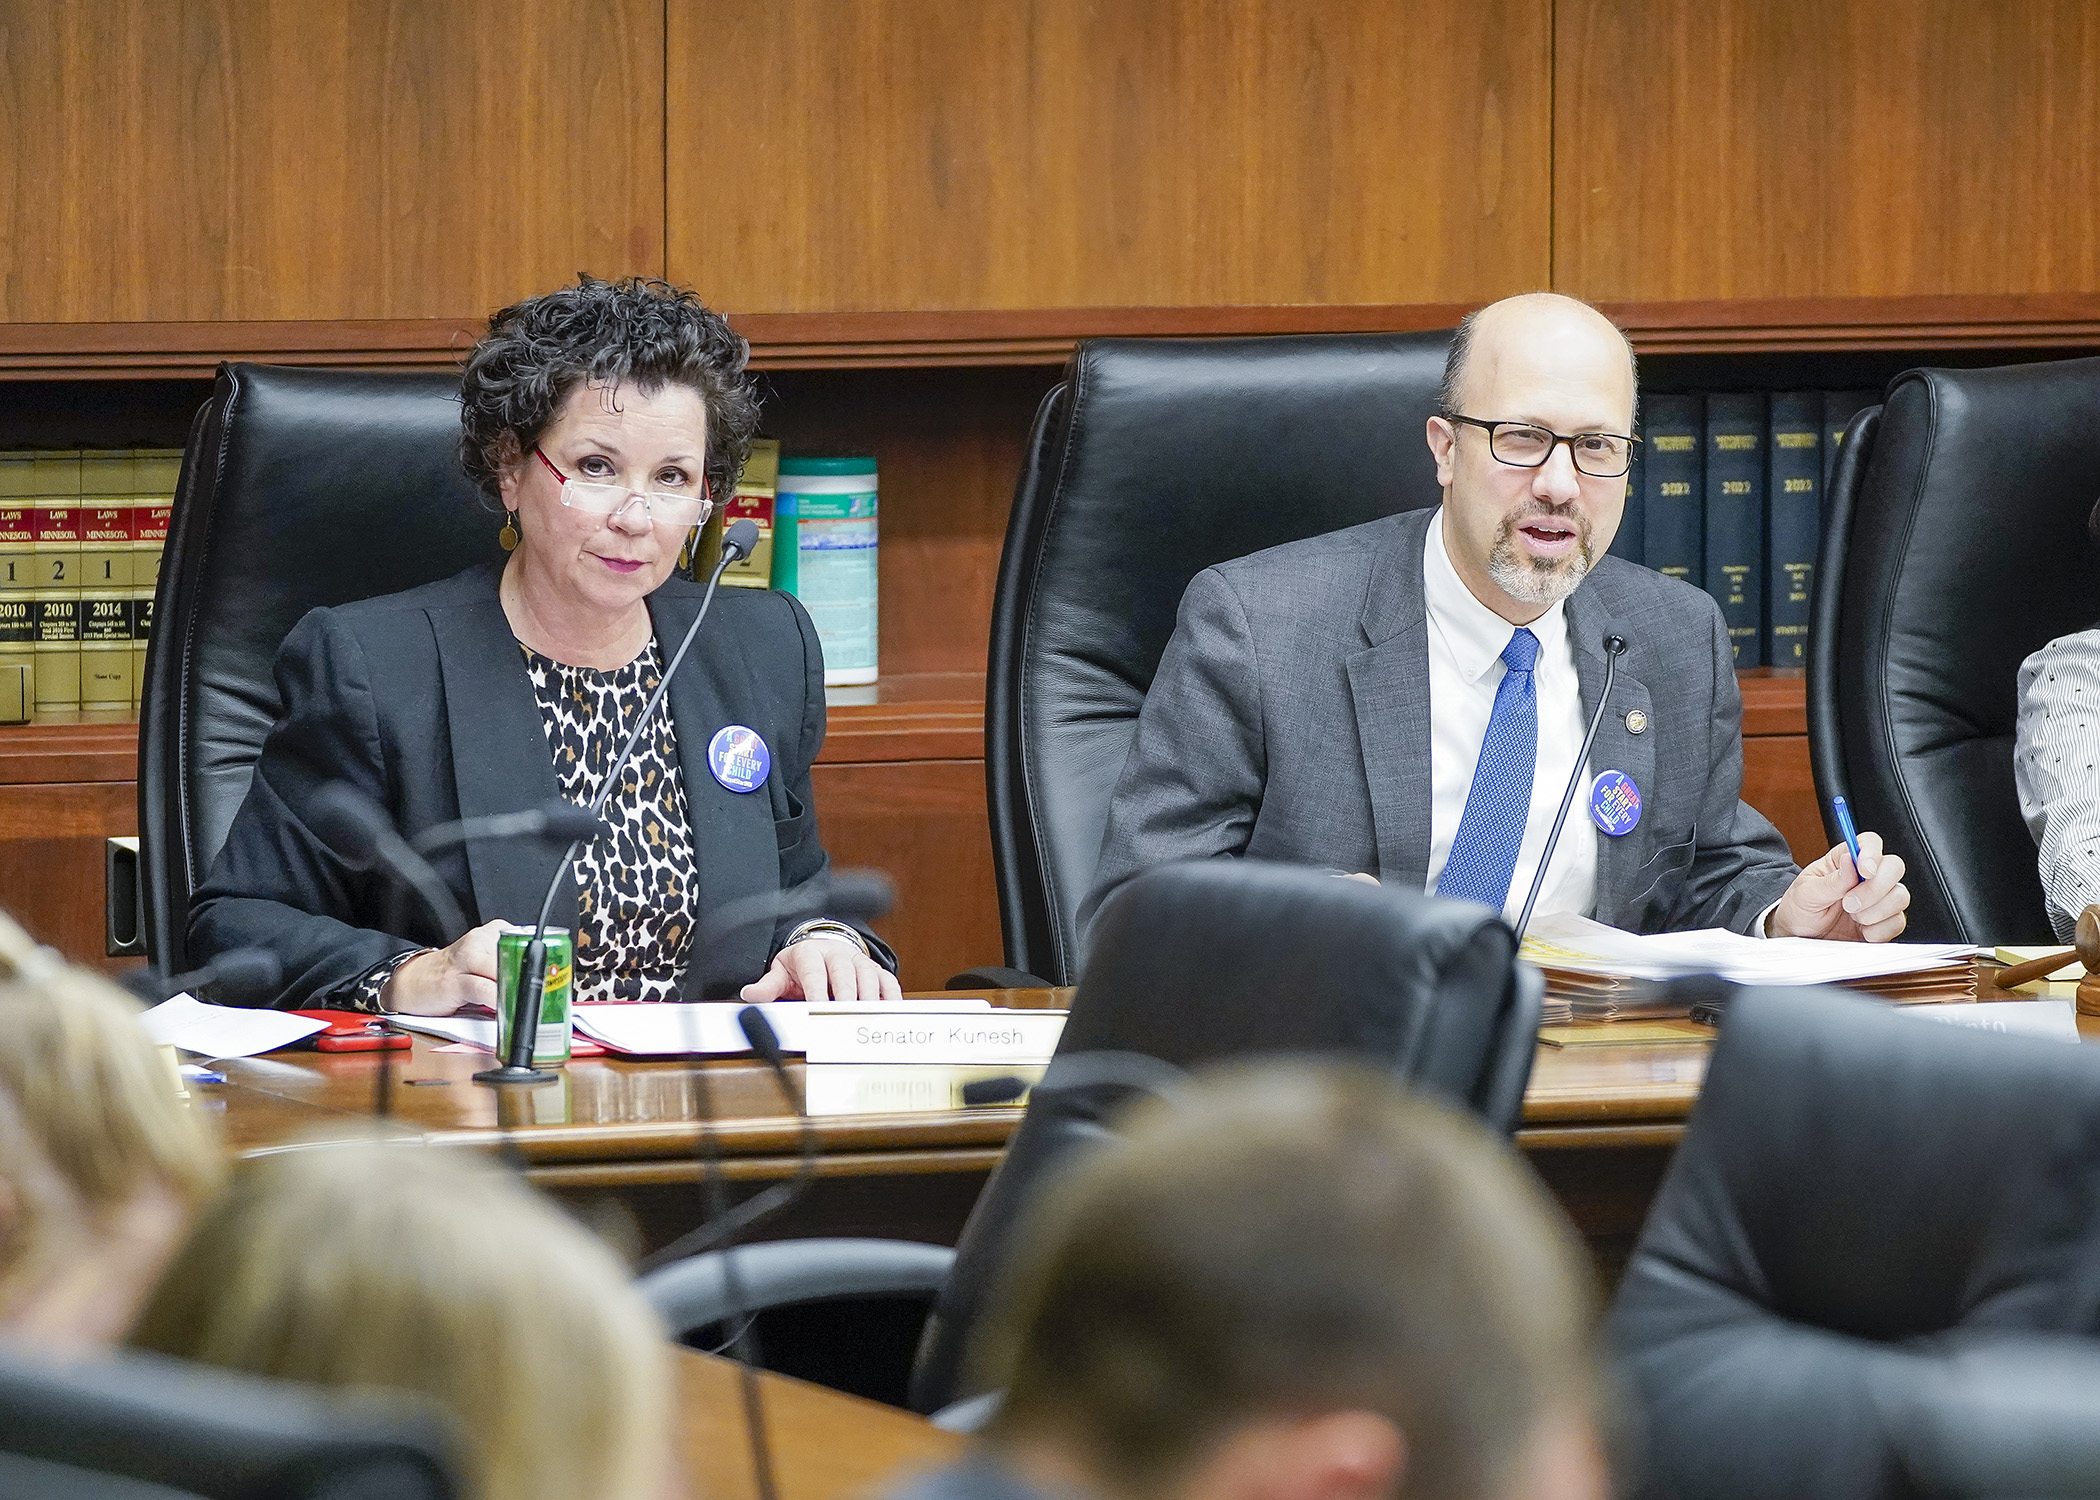 Rep. Dave Pinto and Sen. Mary Kunesh listen to conferee and staff introductions during the first meeting of the omnibus early education finance bill conference committee May 1. (Photo by Andrew VonBank)